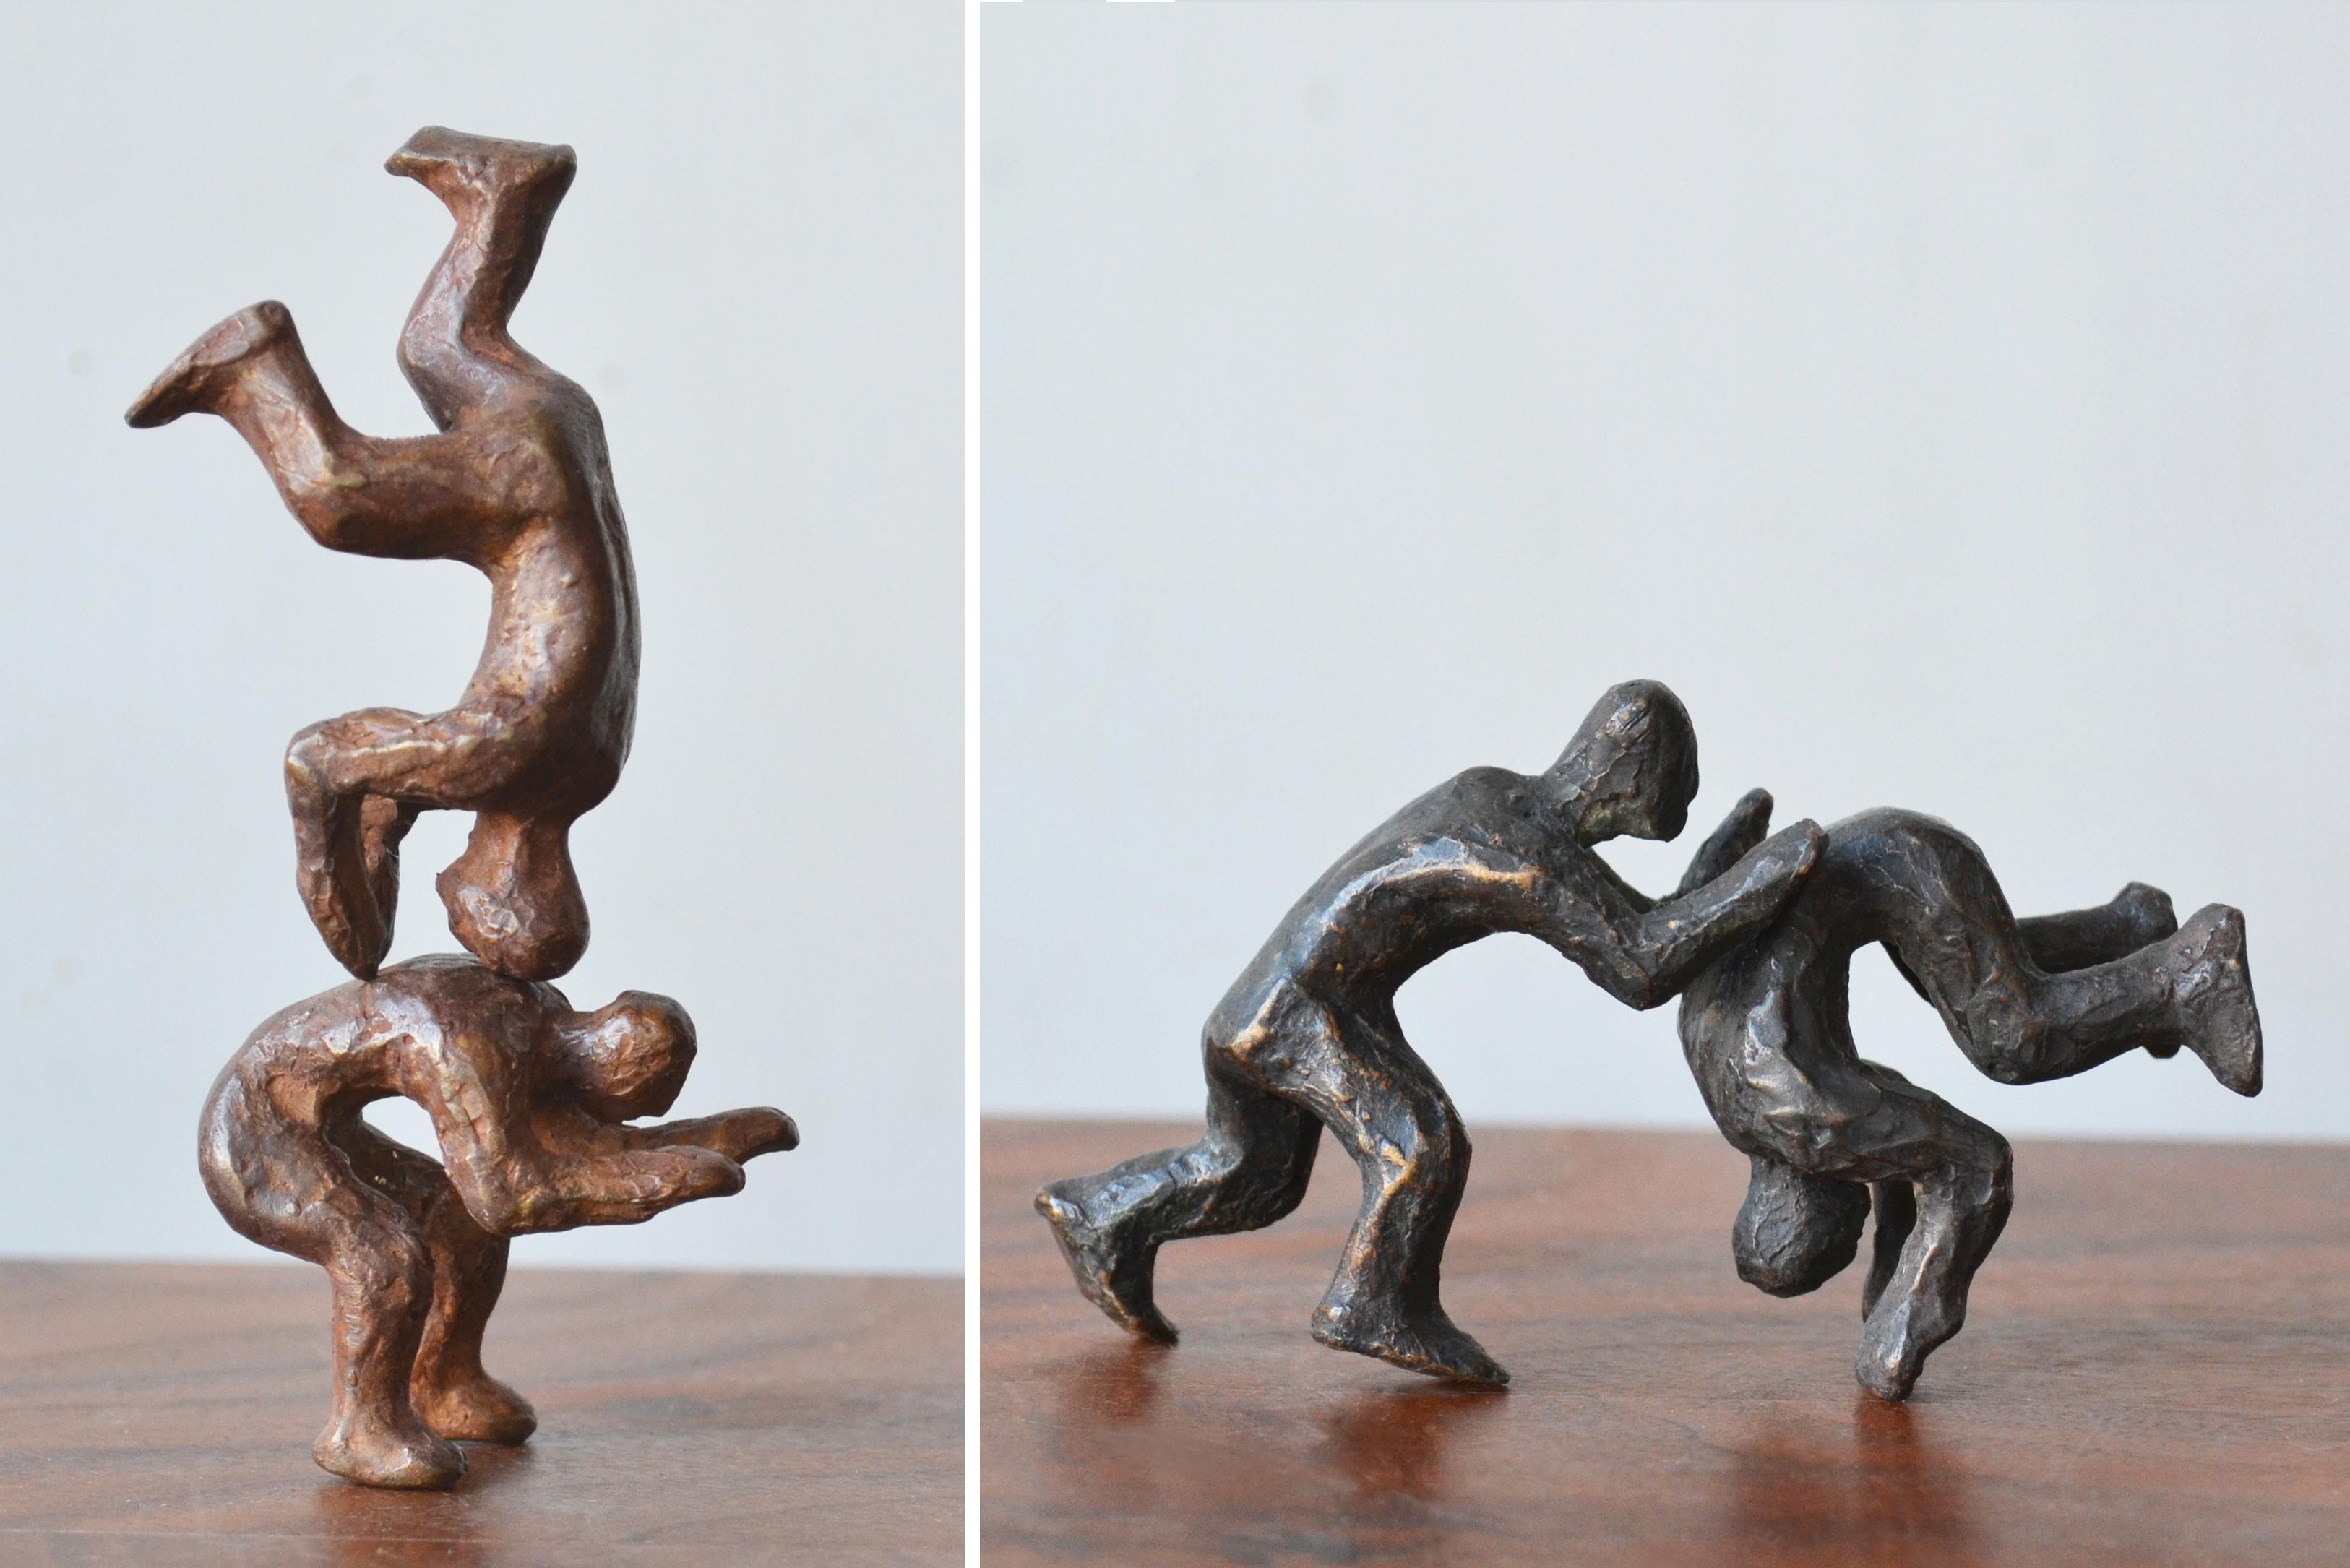 Noa Bornstein Figurative Sculpture - "Why Fight When You Can Play?" pair of interactive bronze figures